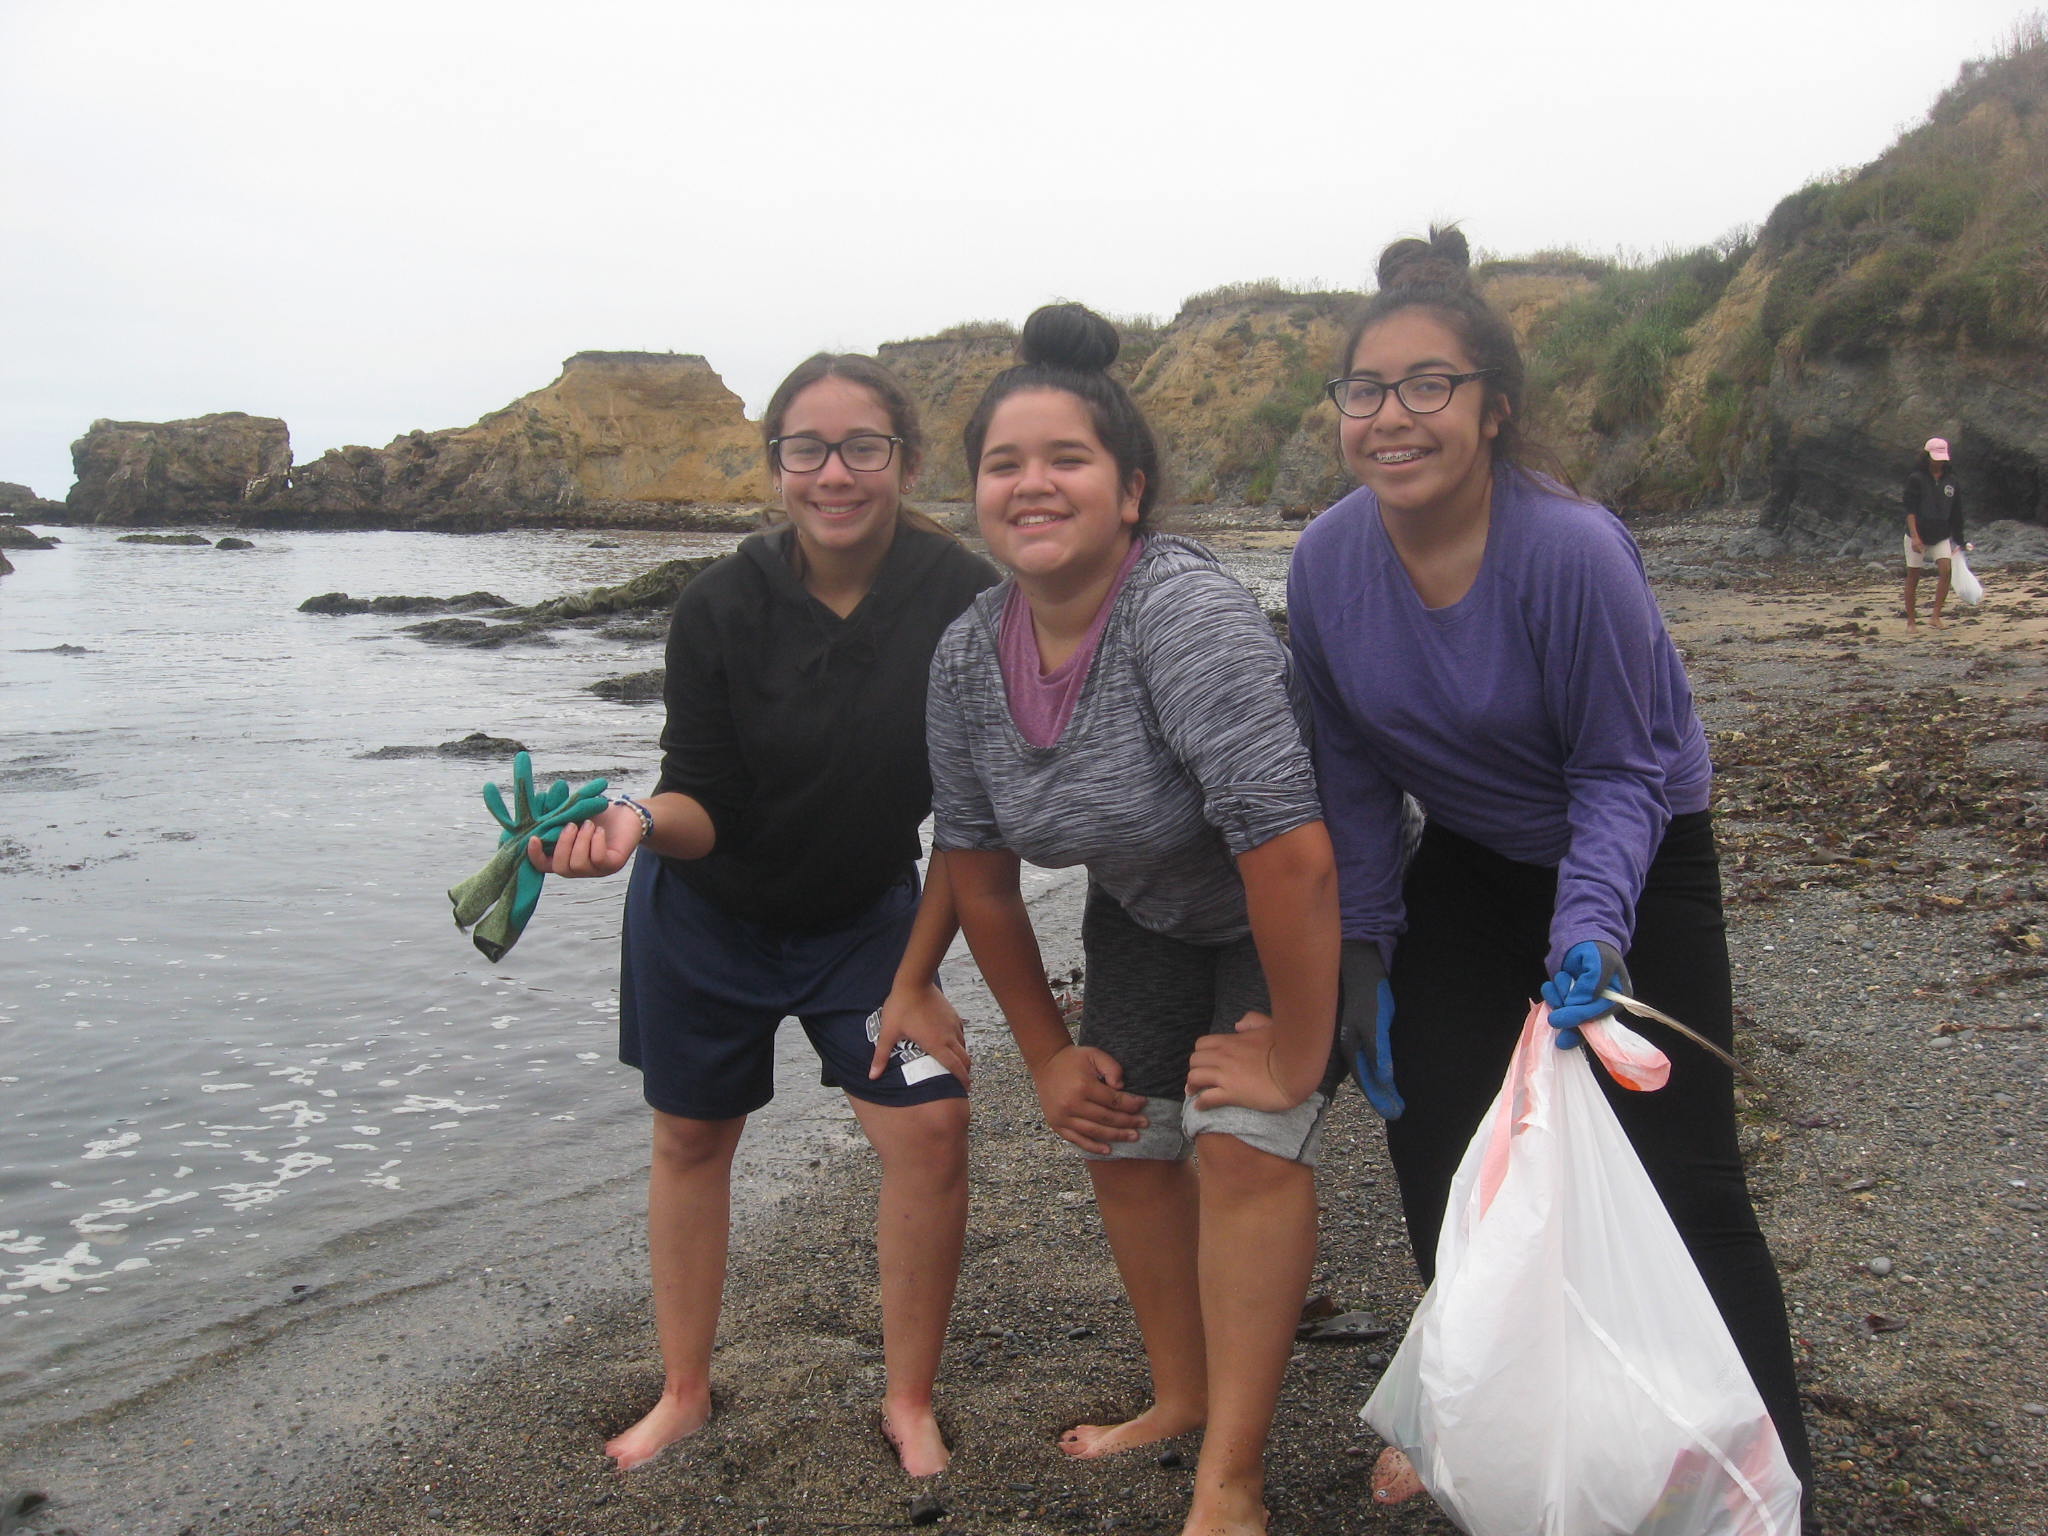 Campers removed trash from one mile of beach during a coastal cleanup day. Photo courtesy Jay Scherf.